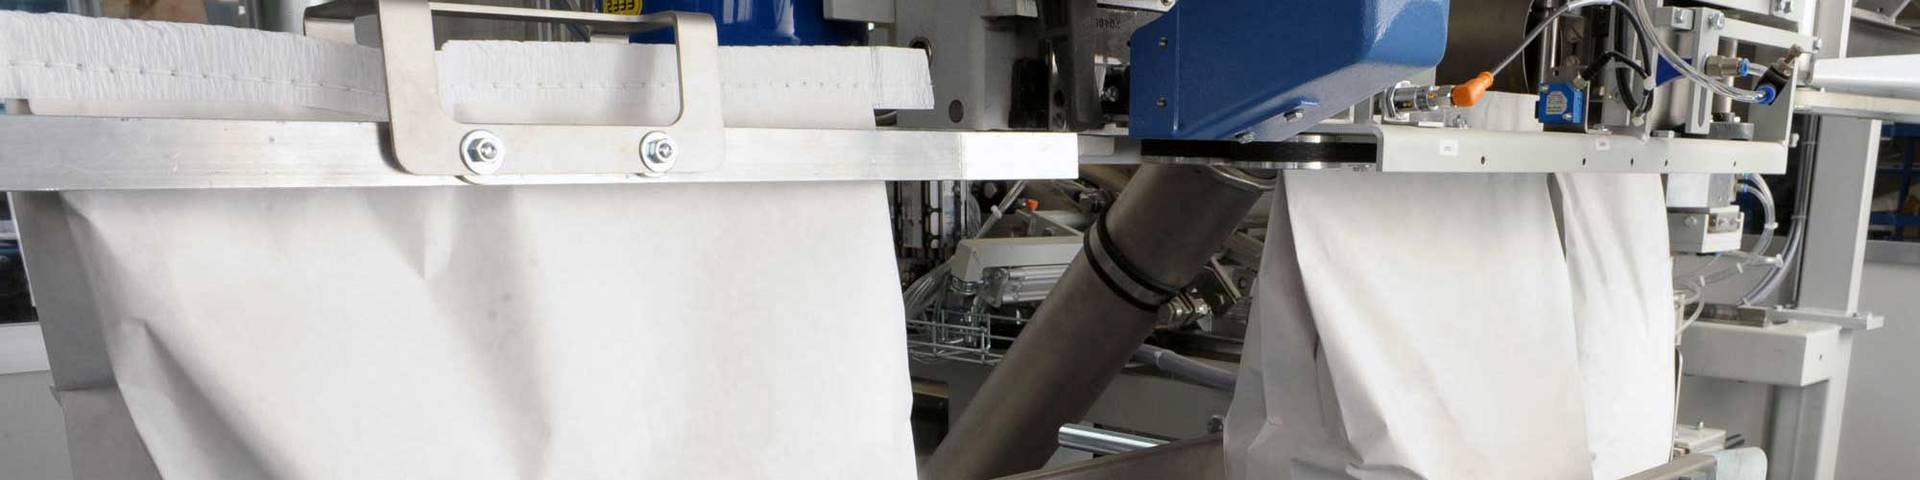 Shrink Bags - Food Packaging Equipment and Supplies